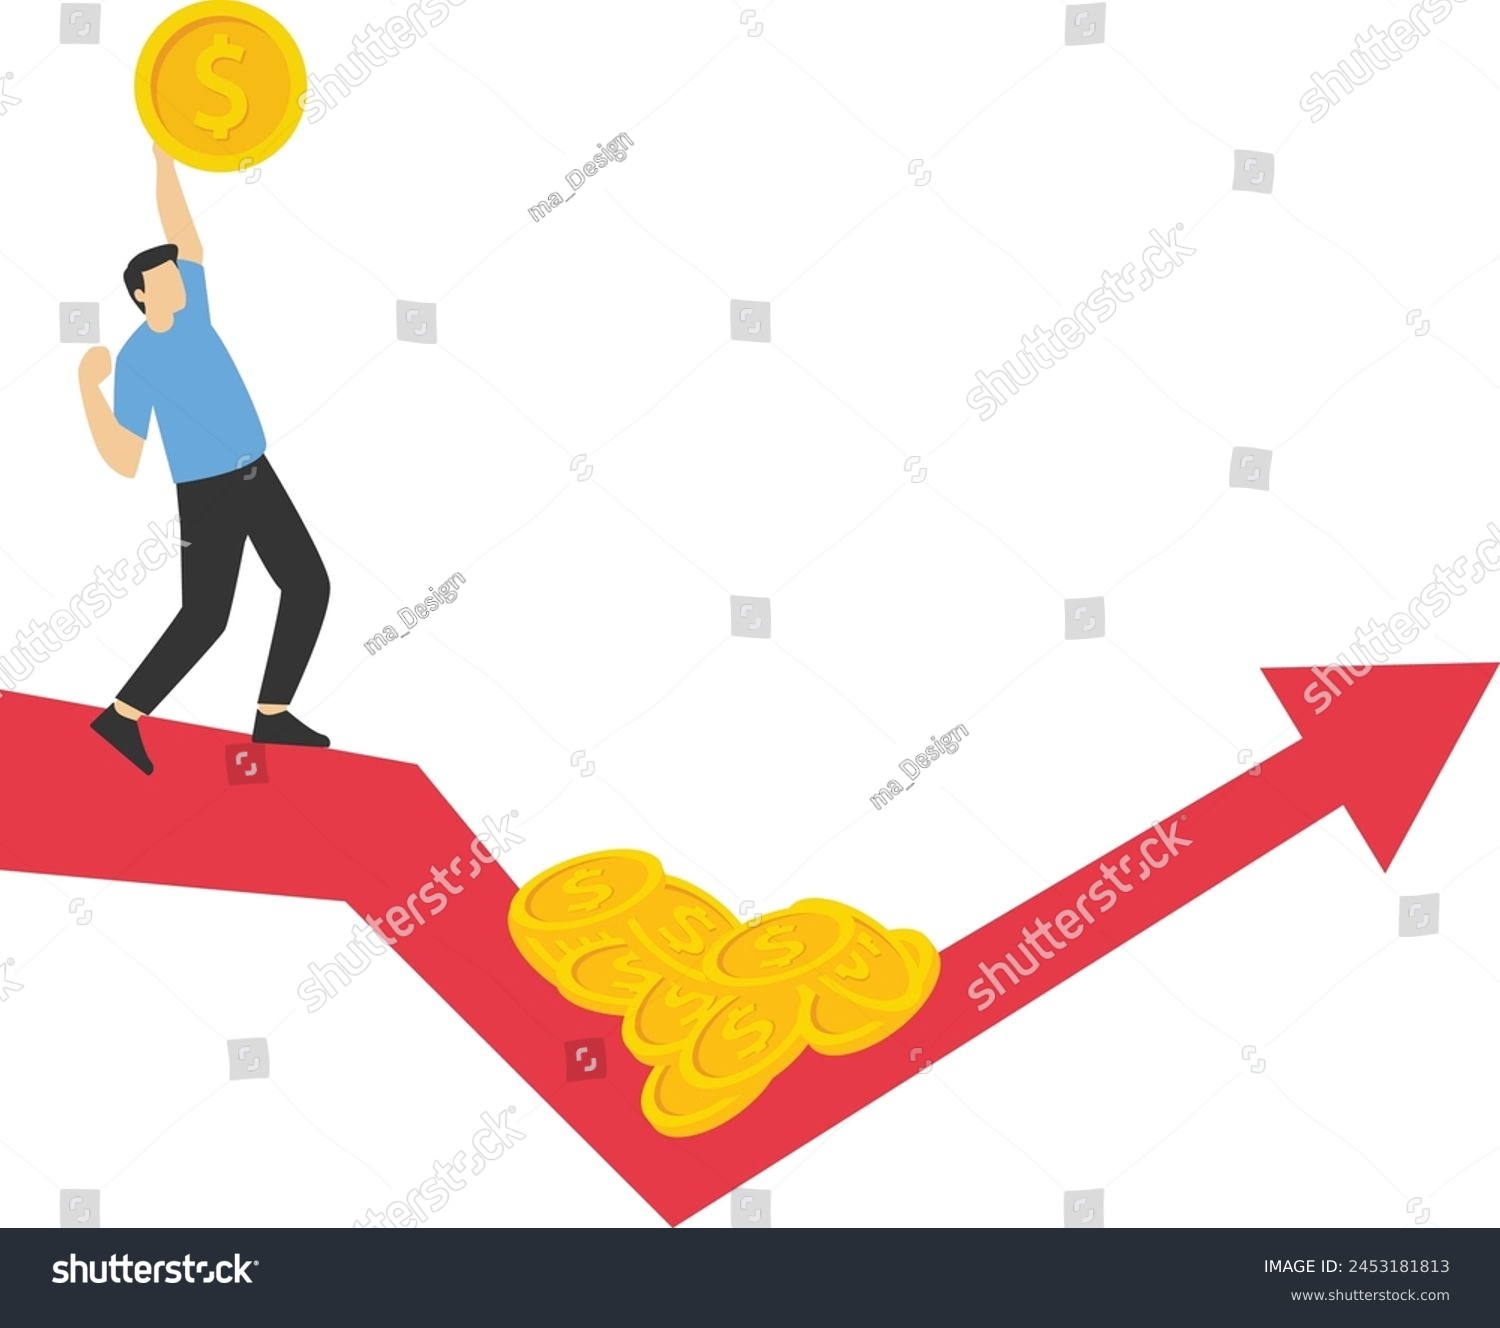 SVG of Buy on the dip, purchase stock when price drop, trader signal to invest, make profit from market collapse concept, smart businessman investor buy stock with down arrow graph.

 svg